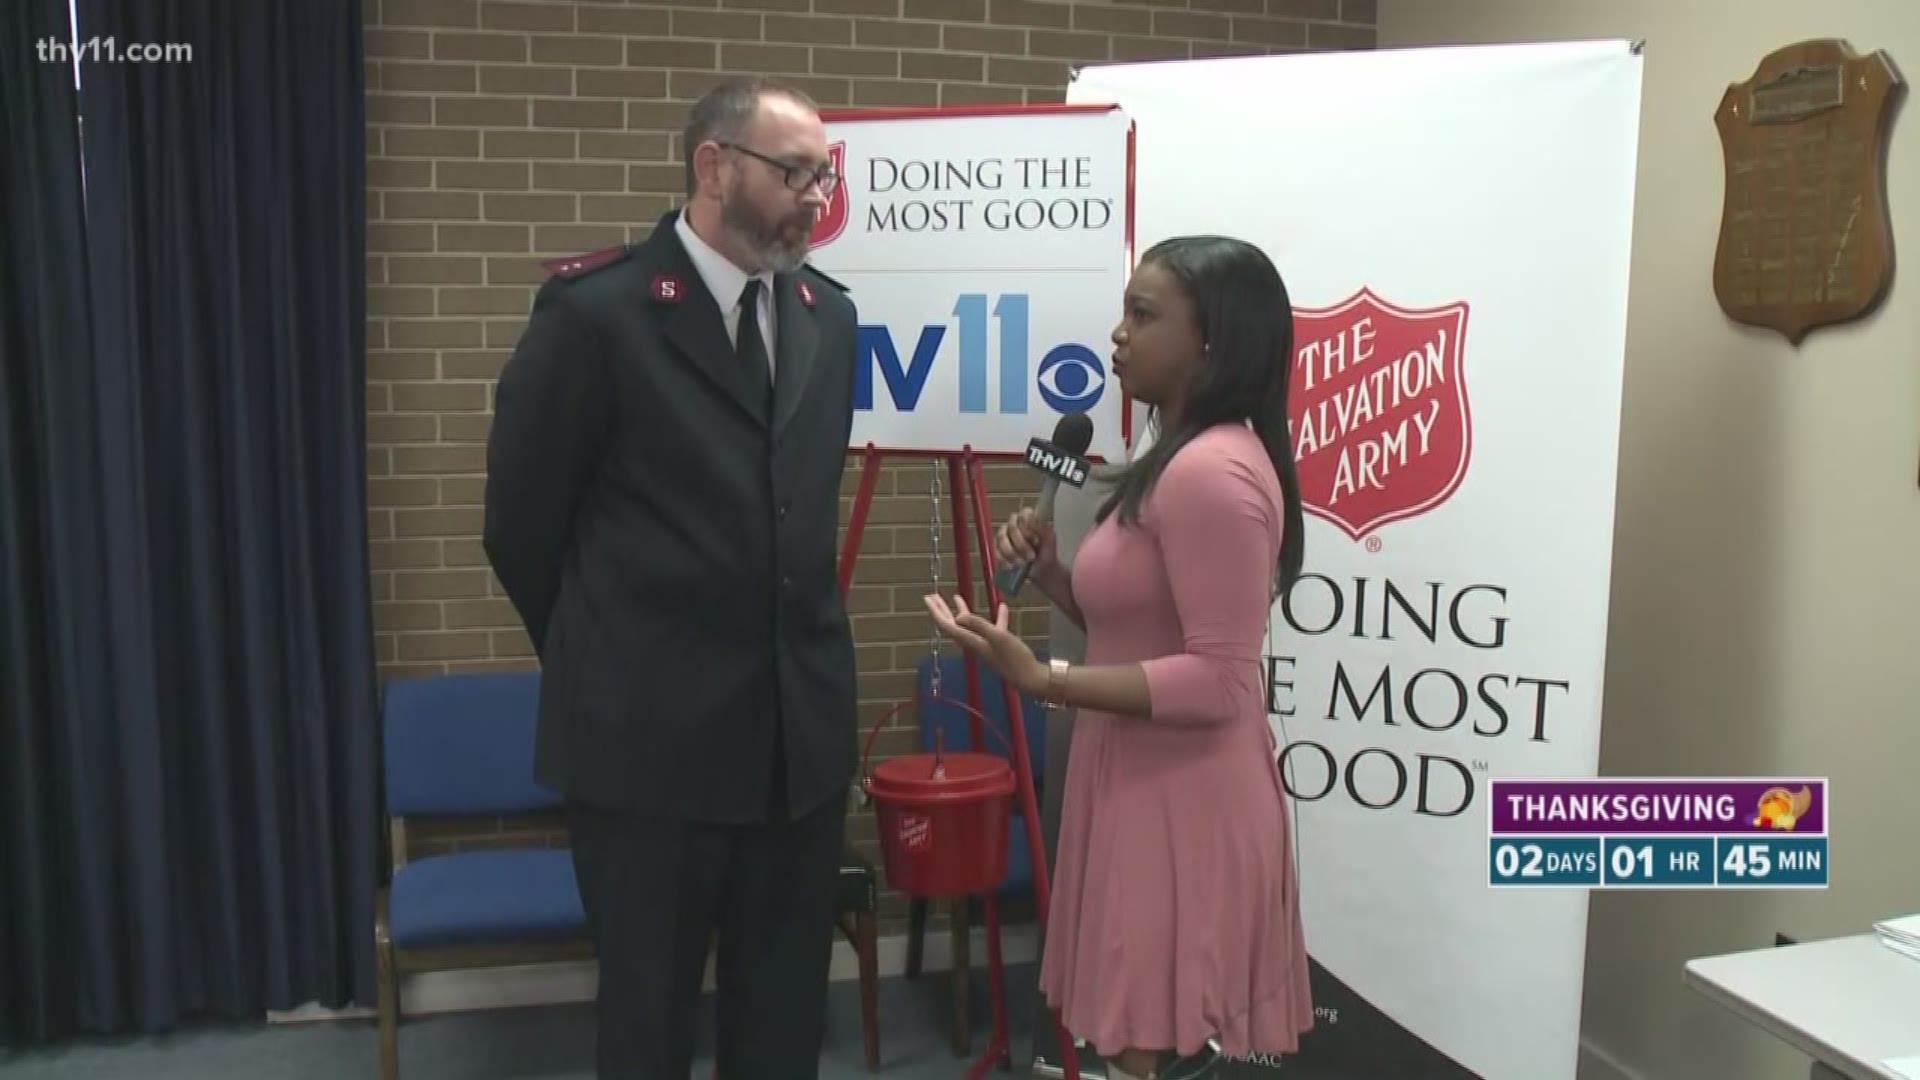 The Salvation Army is taking donations!